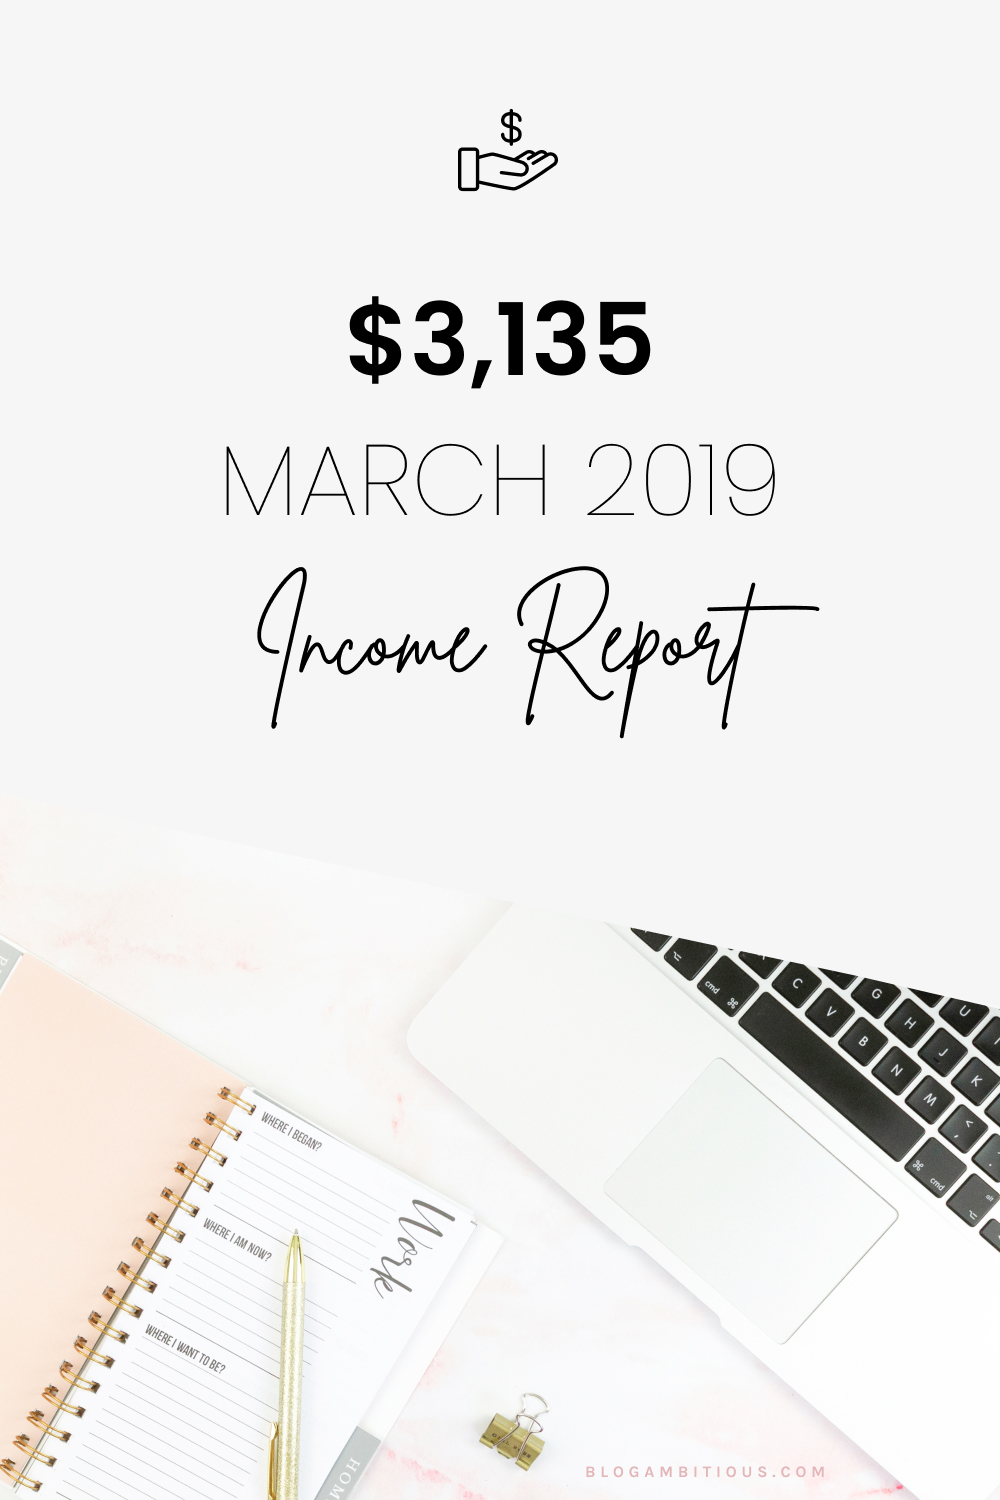 March 2019 Blog Income Report